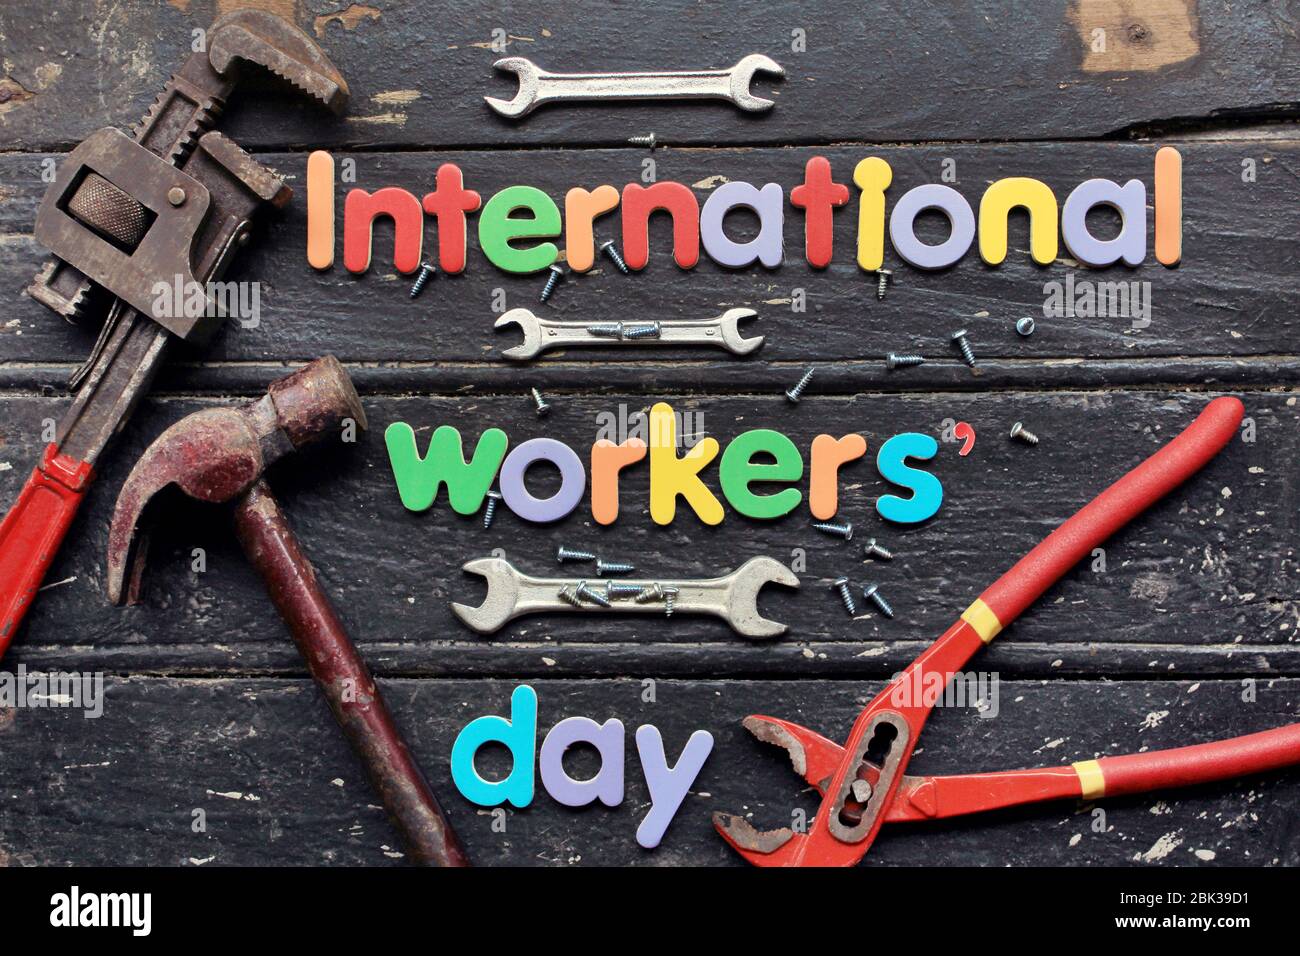 International workers' day text in red color on wooden background with construction repair tools. Labor day concept sign. International workers' day. Stock Photo